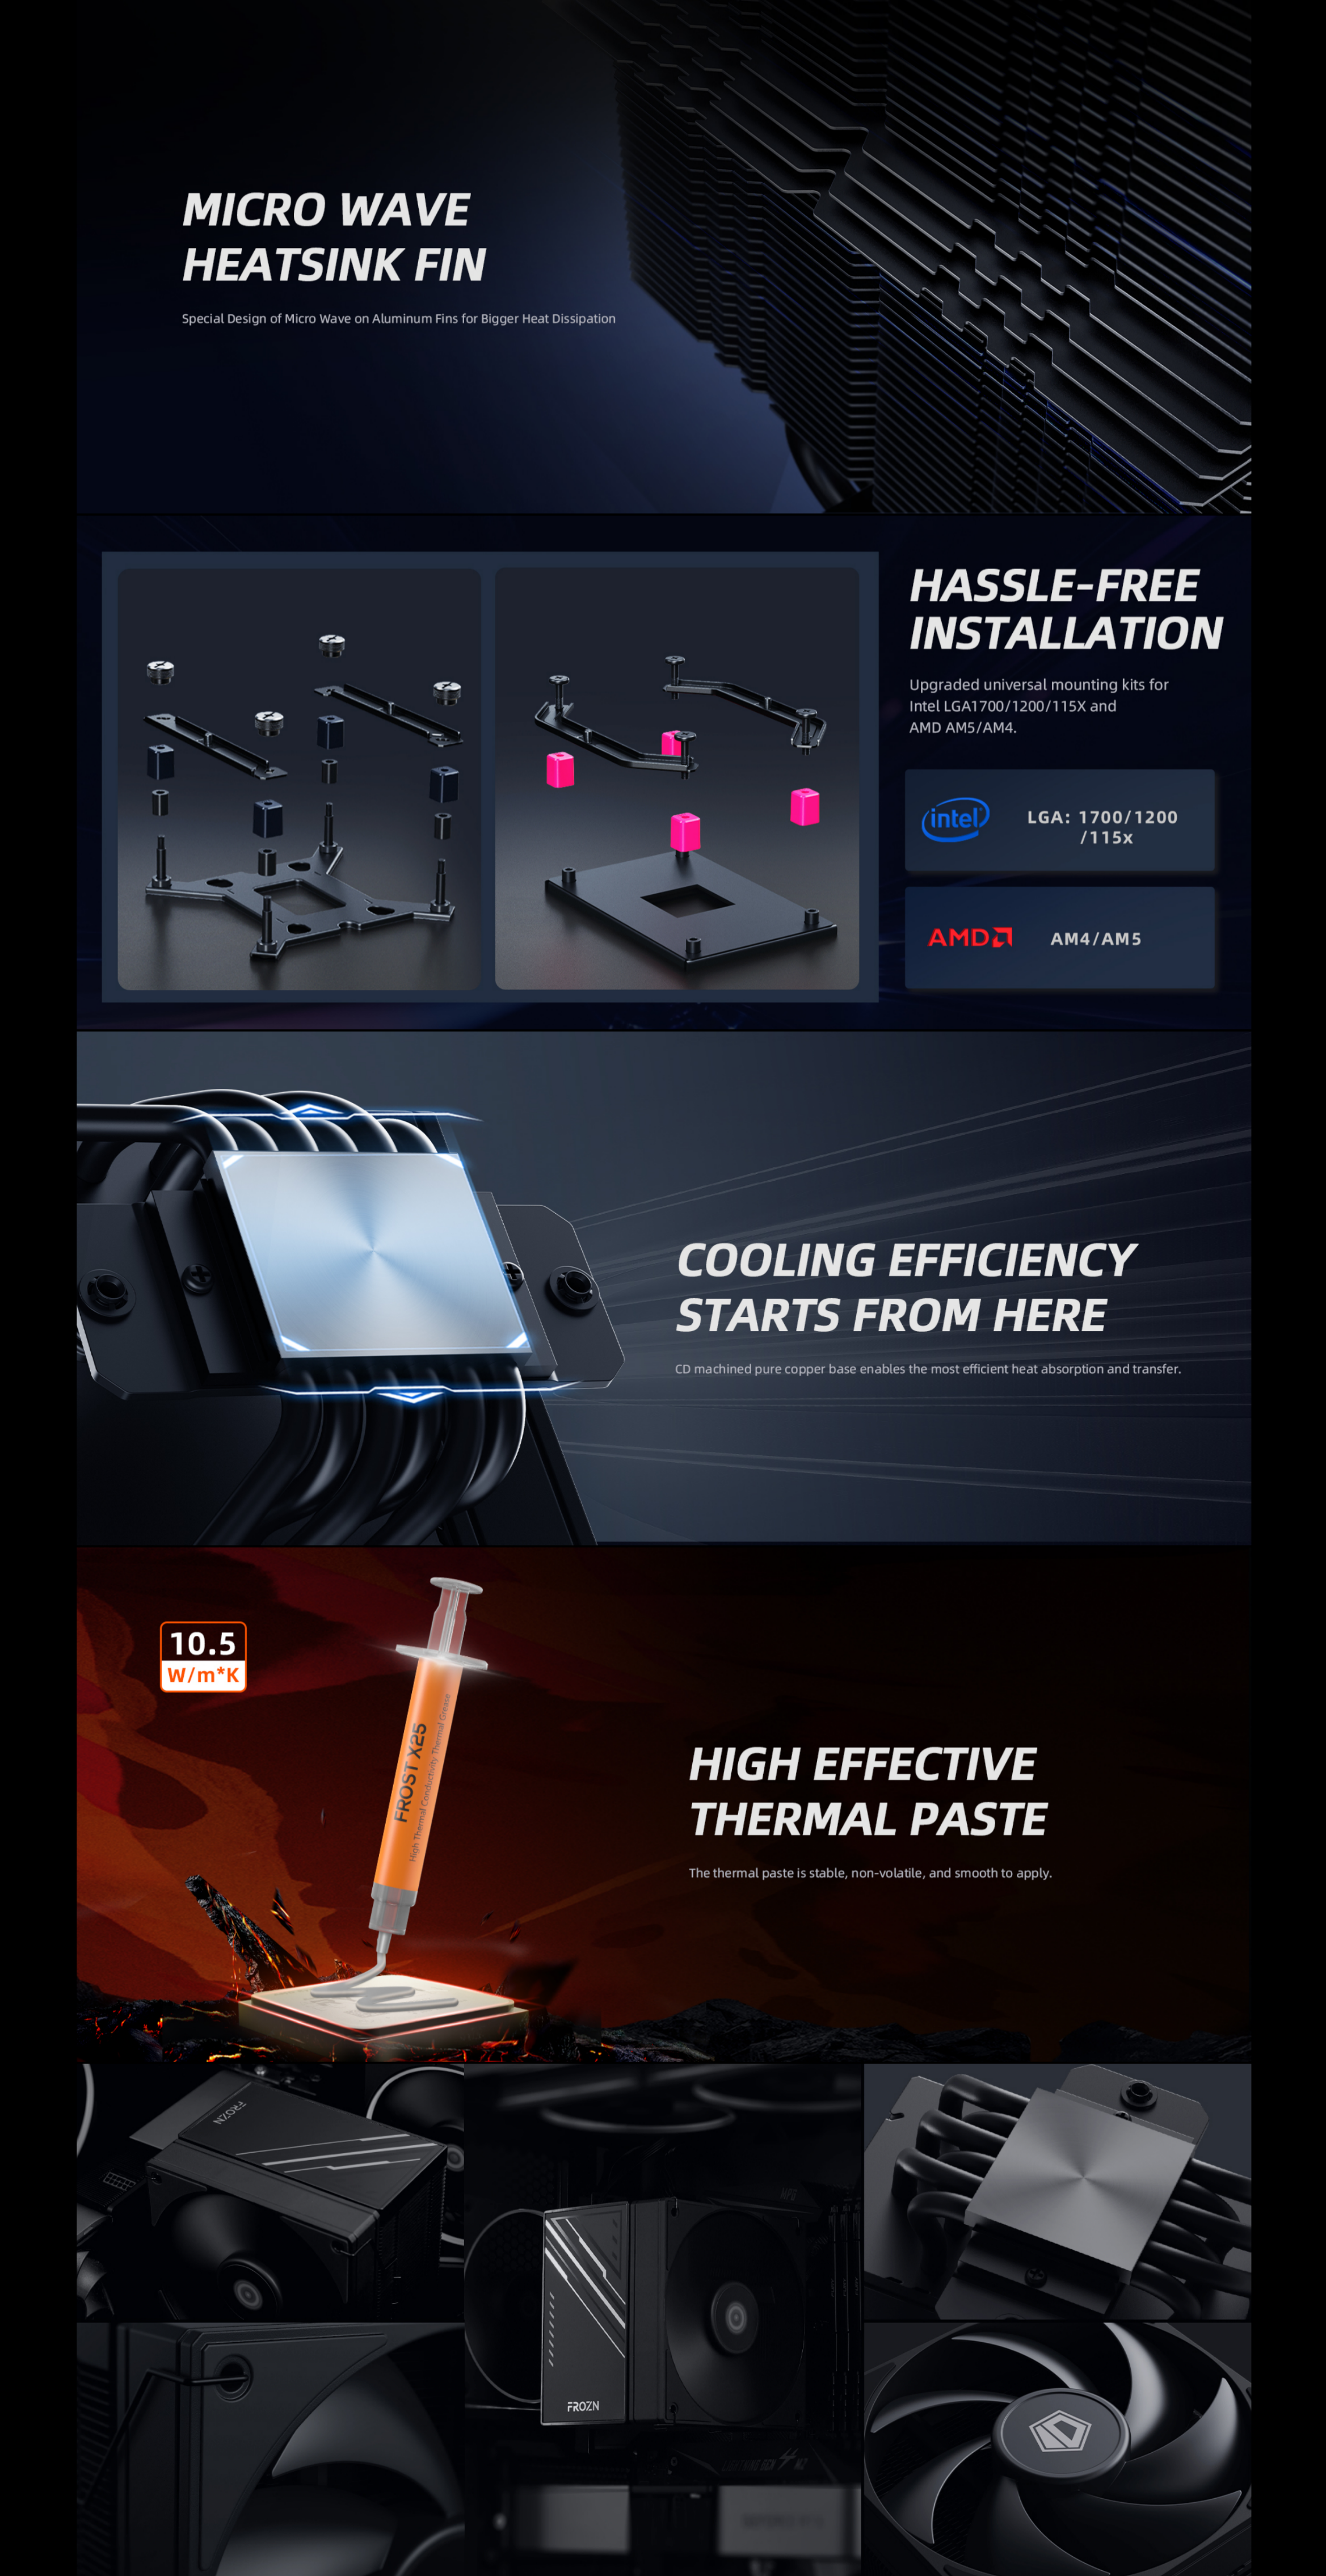 A large marketing image providing additional information about the product ID-COOLING FROZN A610 CPU Cooler - Black - Additional alt info not provided